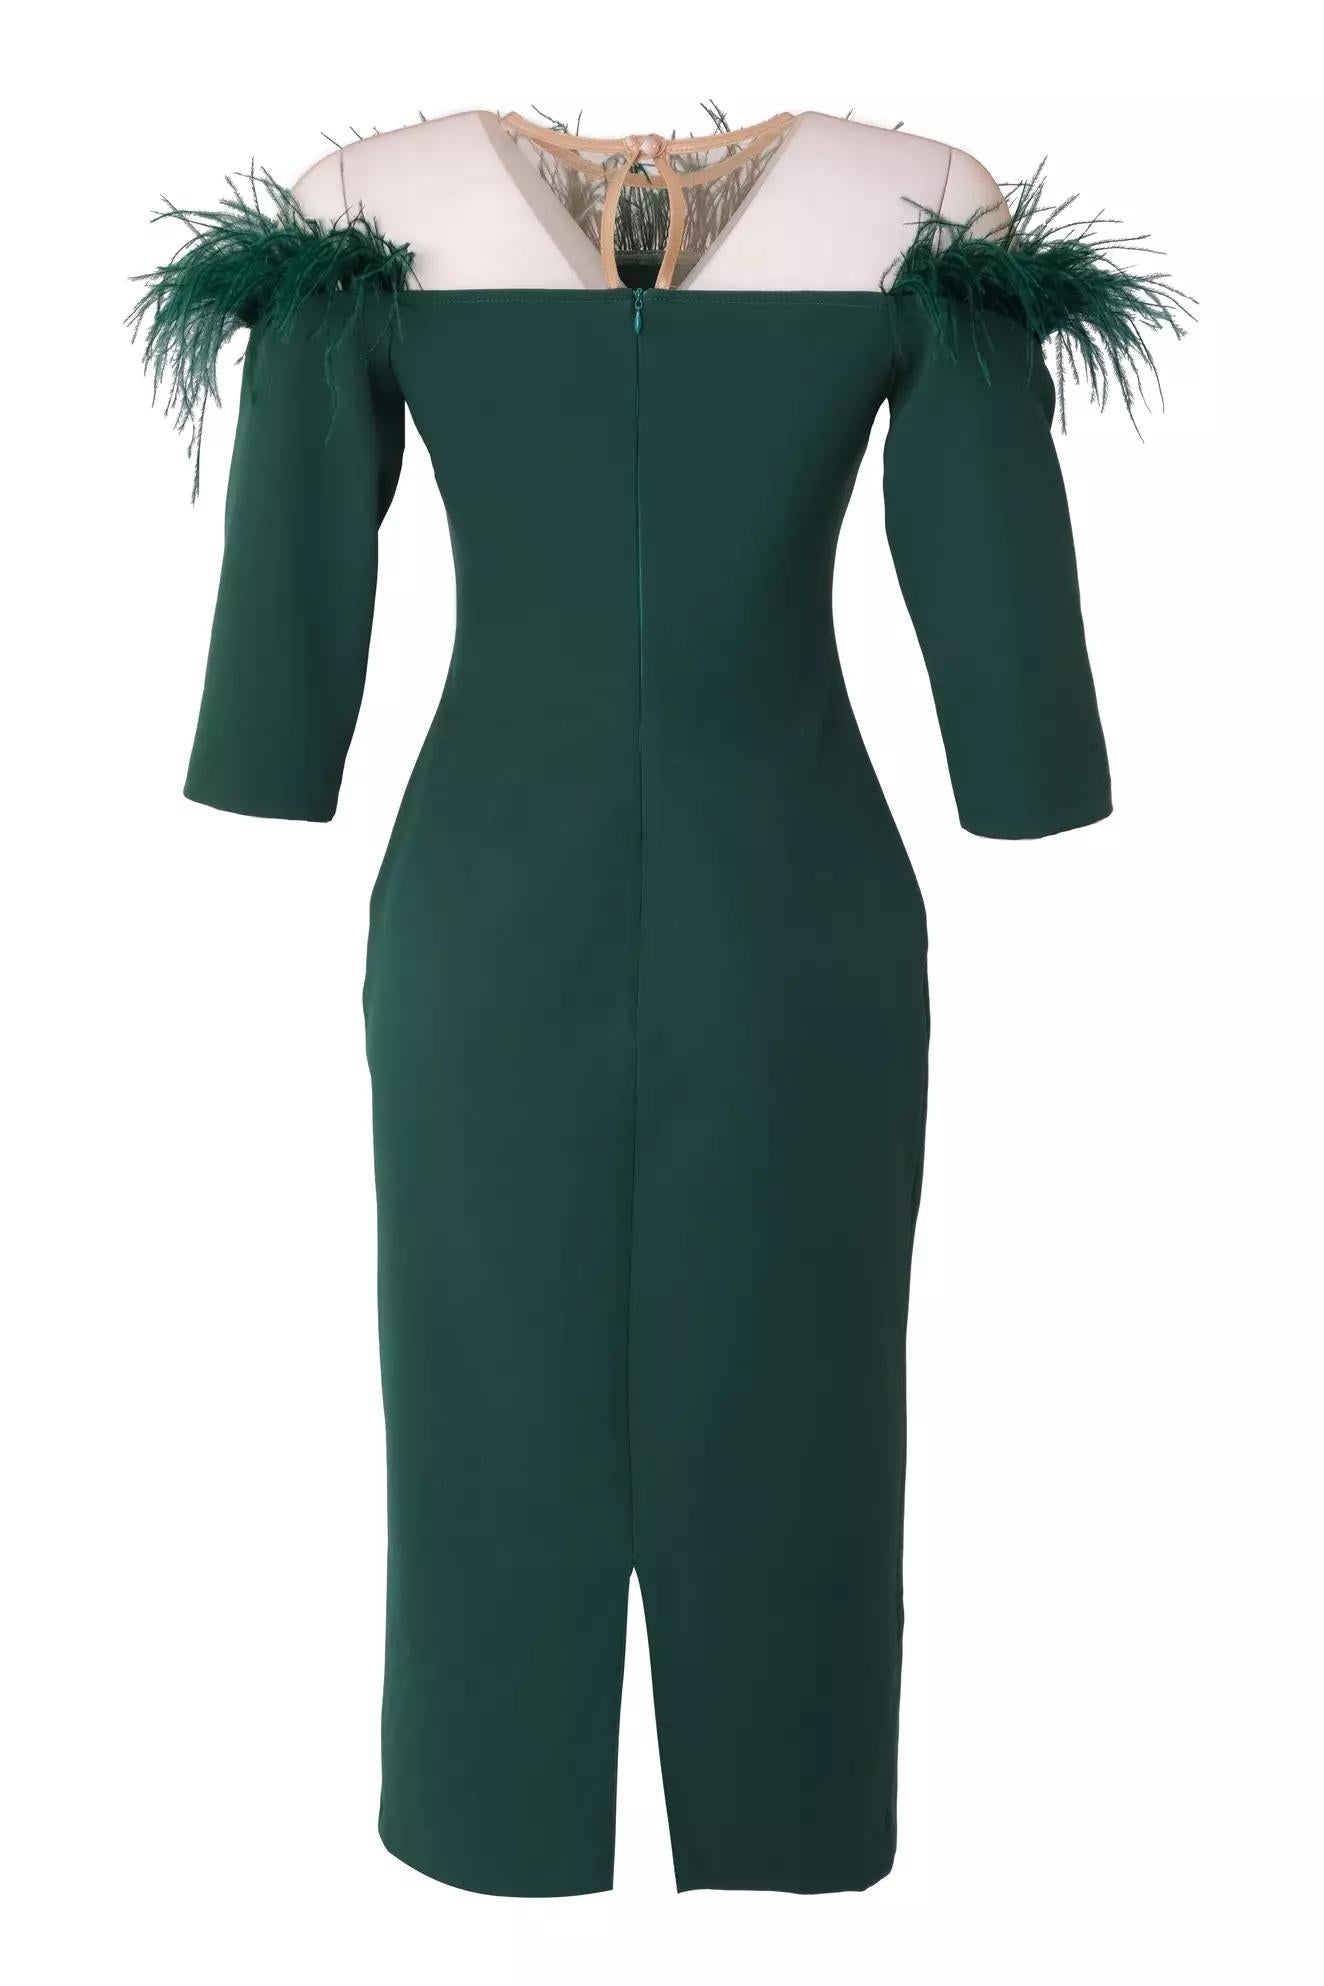 Crepe 3/4 Sleeve with Feather Neckline and Waist Buckle Midi Dress - Green